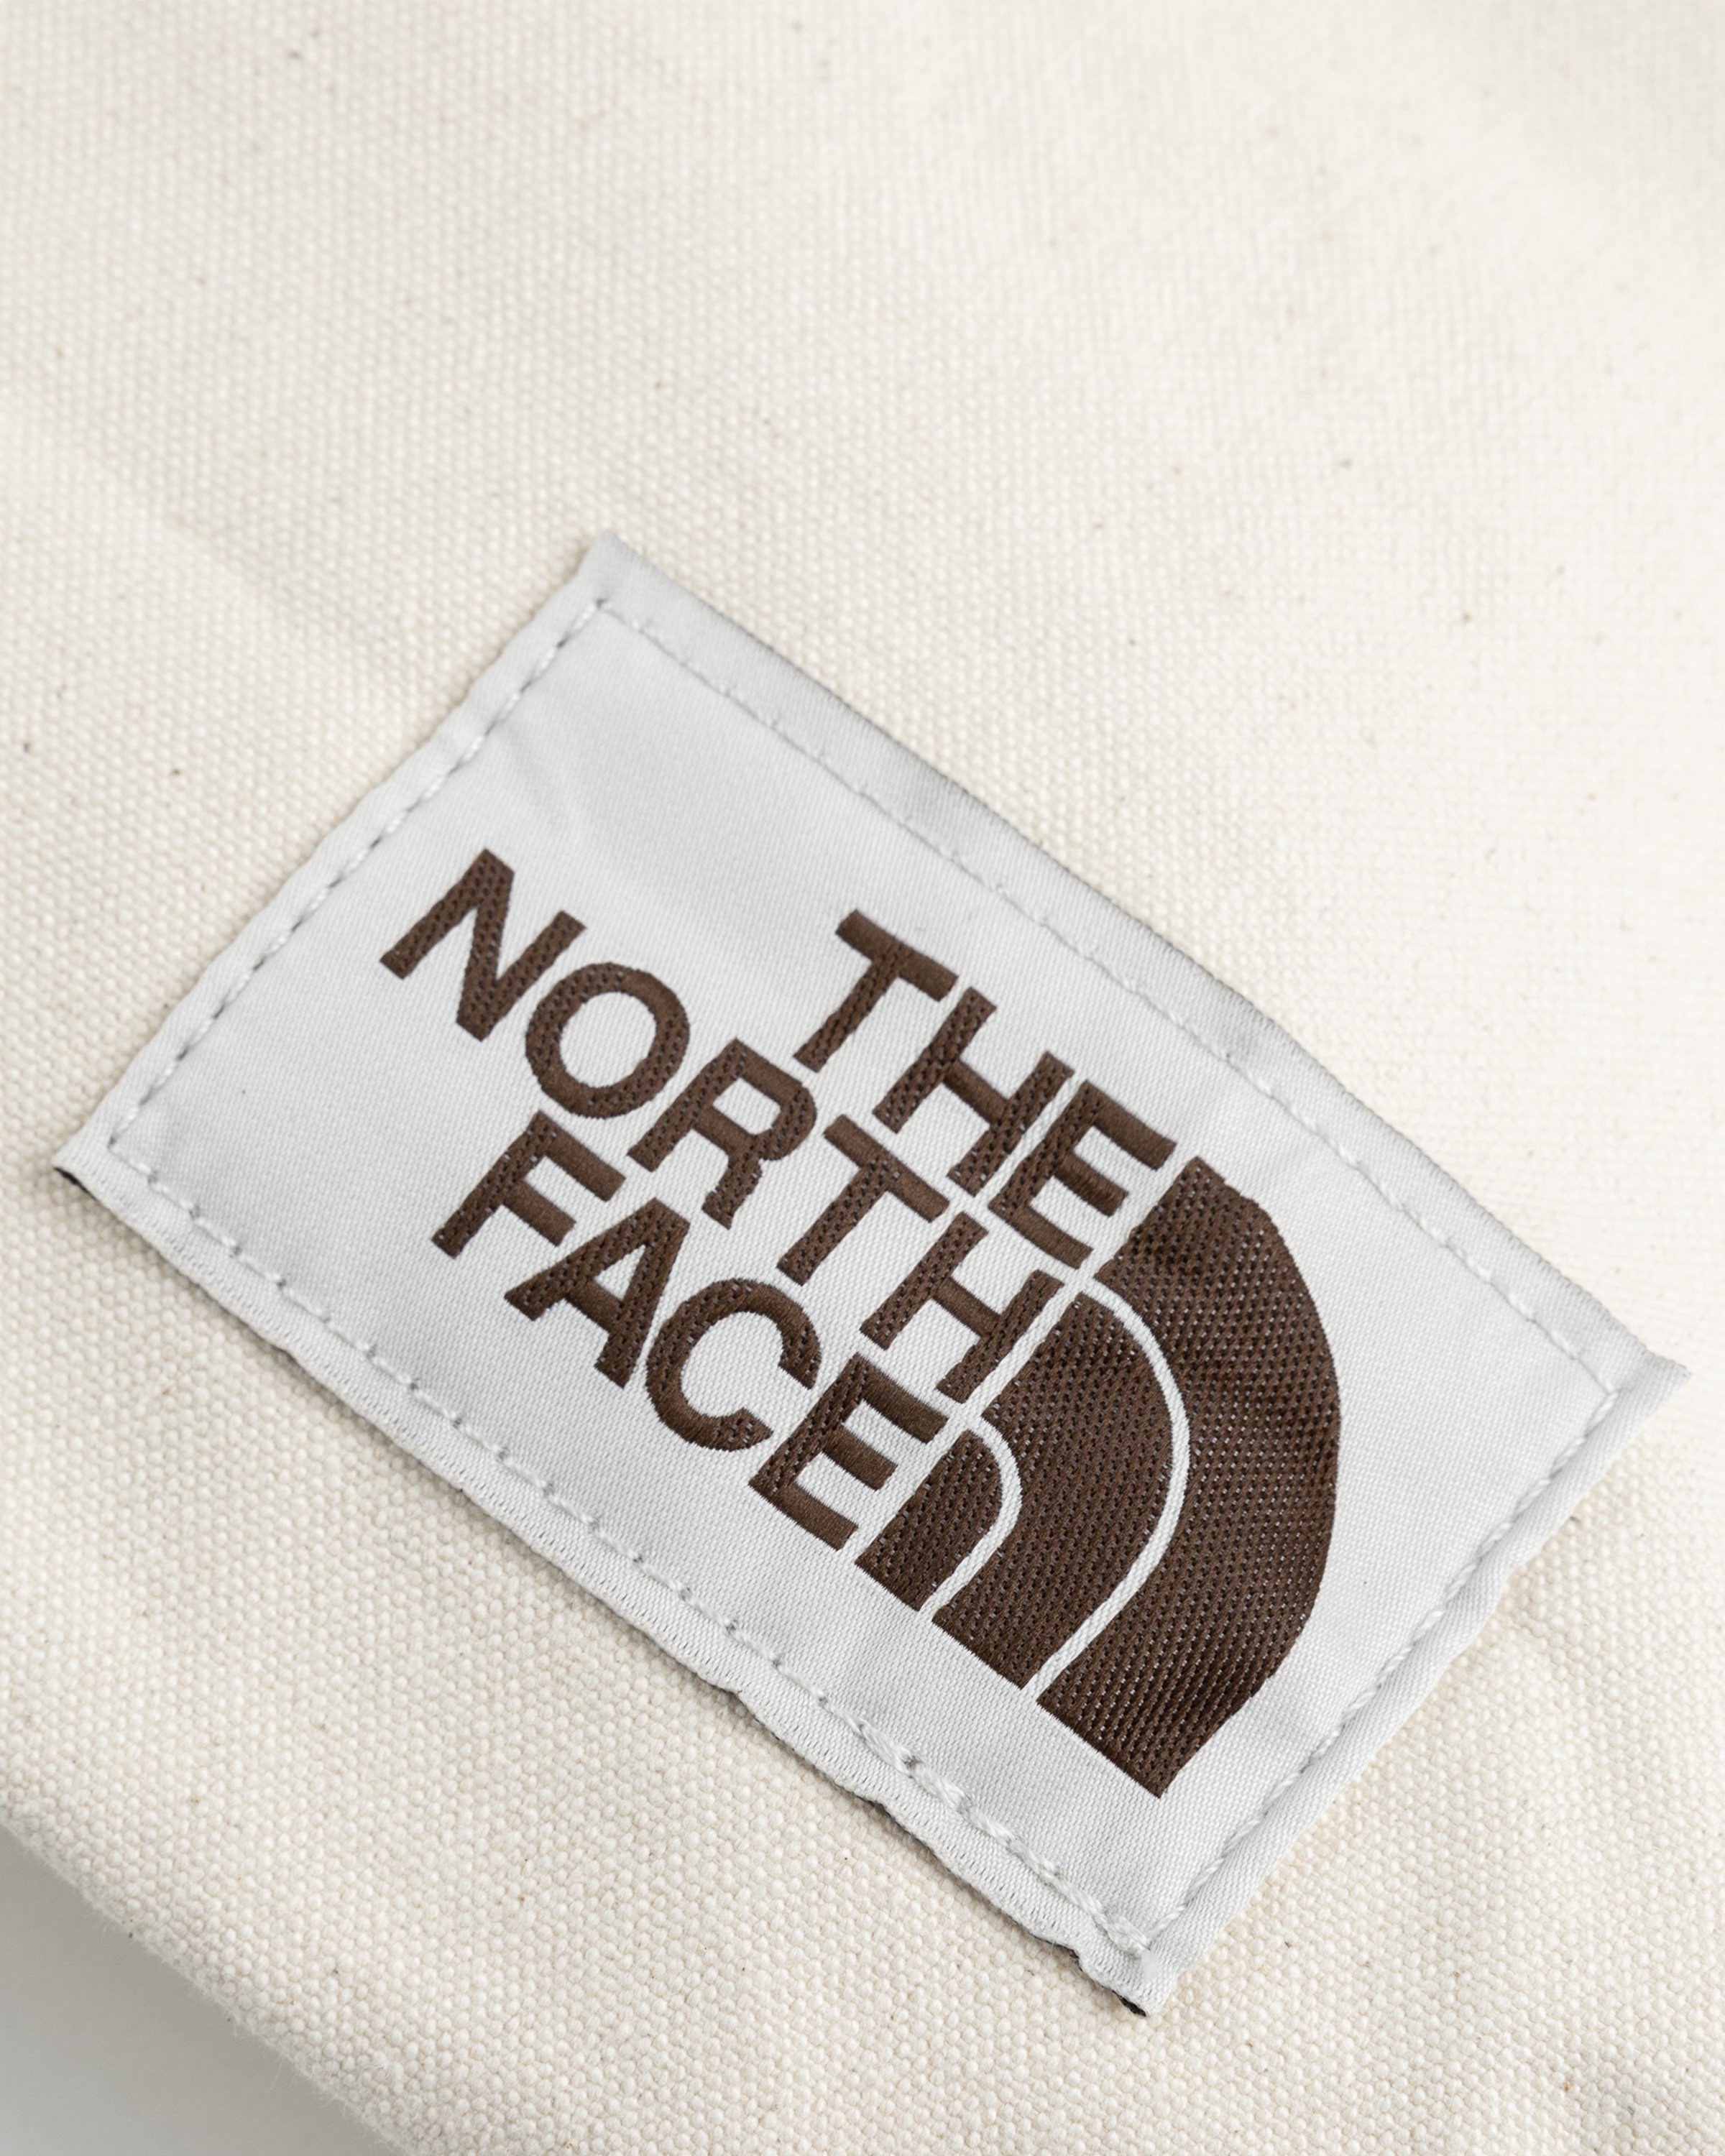 The North Face - Adjustable Cotton Tote Bag Beige - Accessories - Multi - Image 8